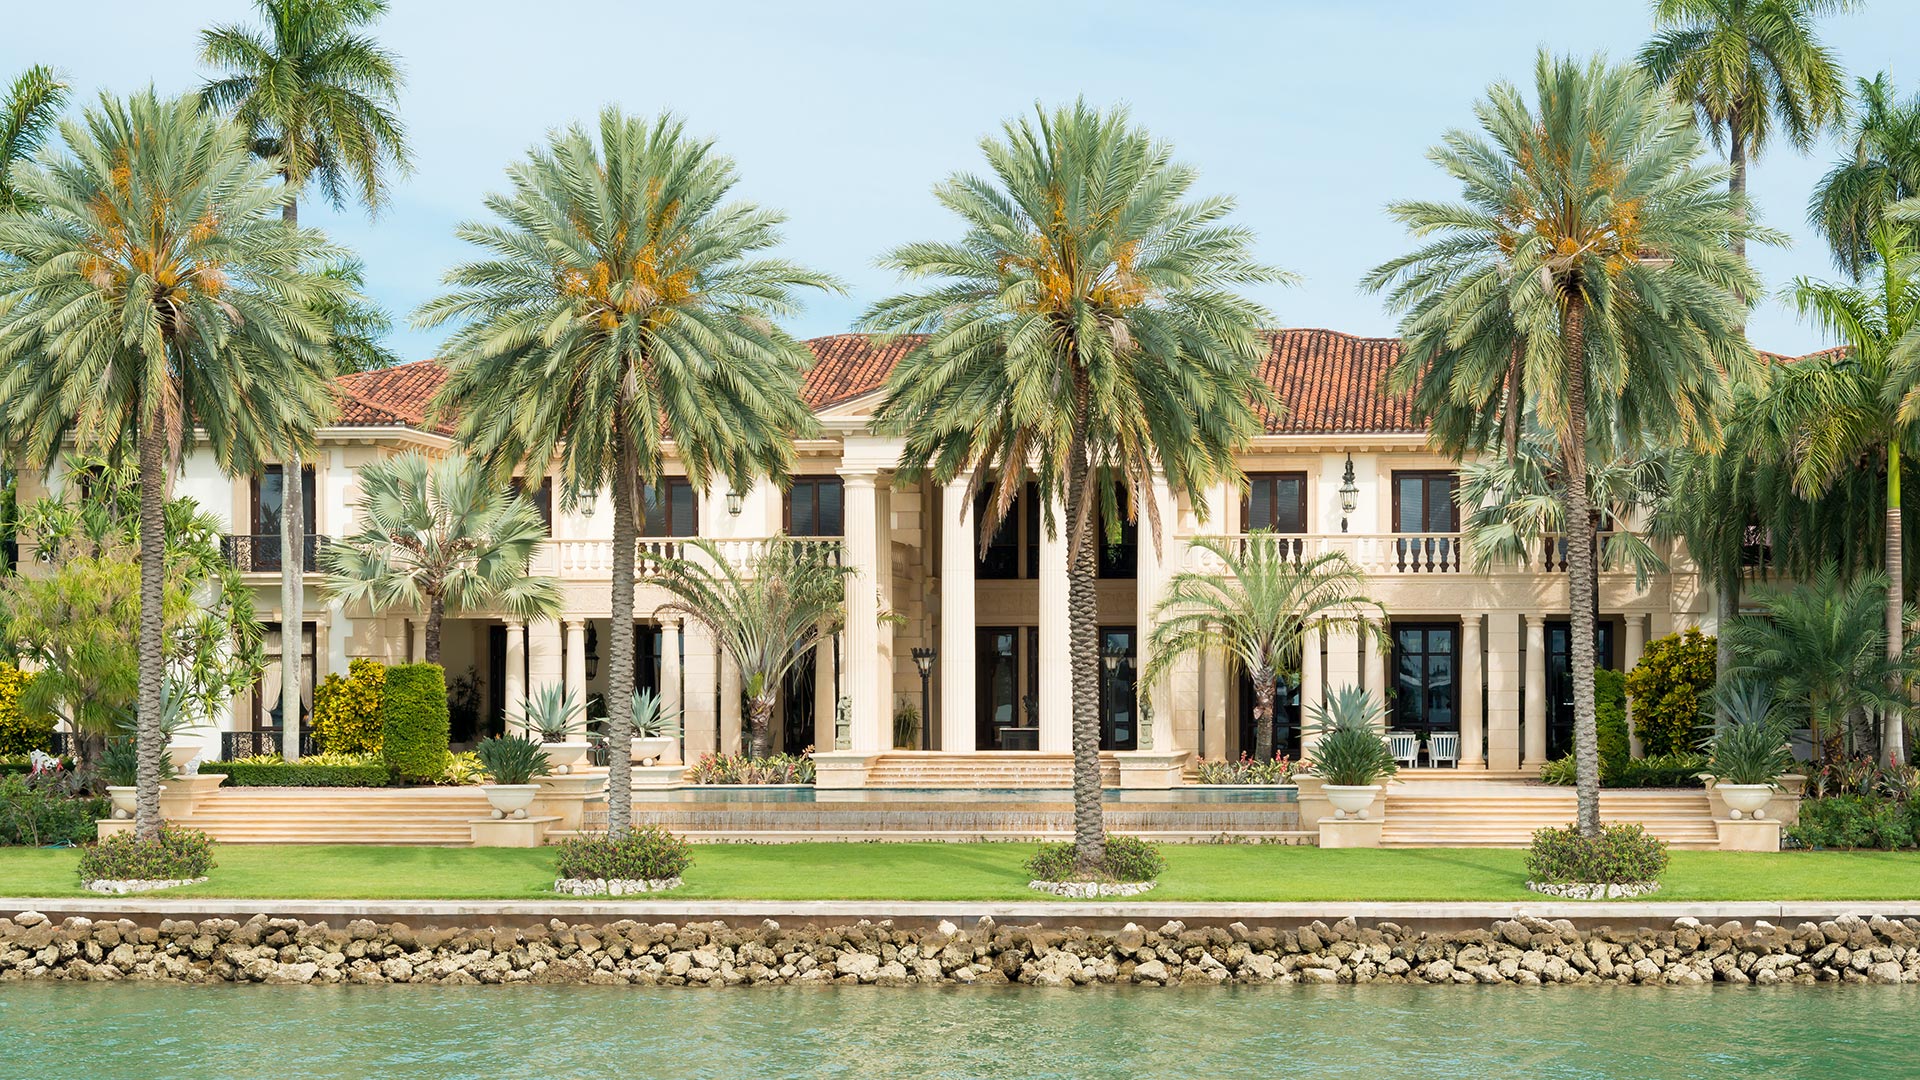 A home in McGregor, FL surrounded by large palm trees.